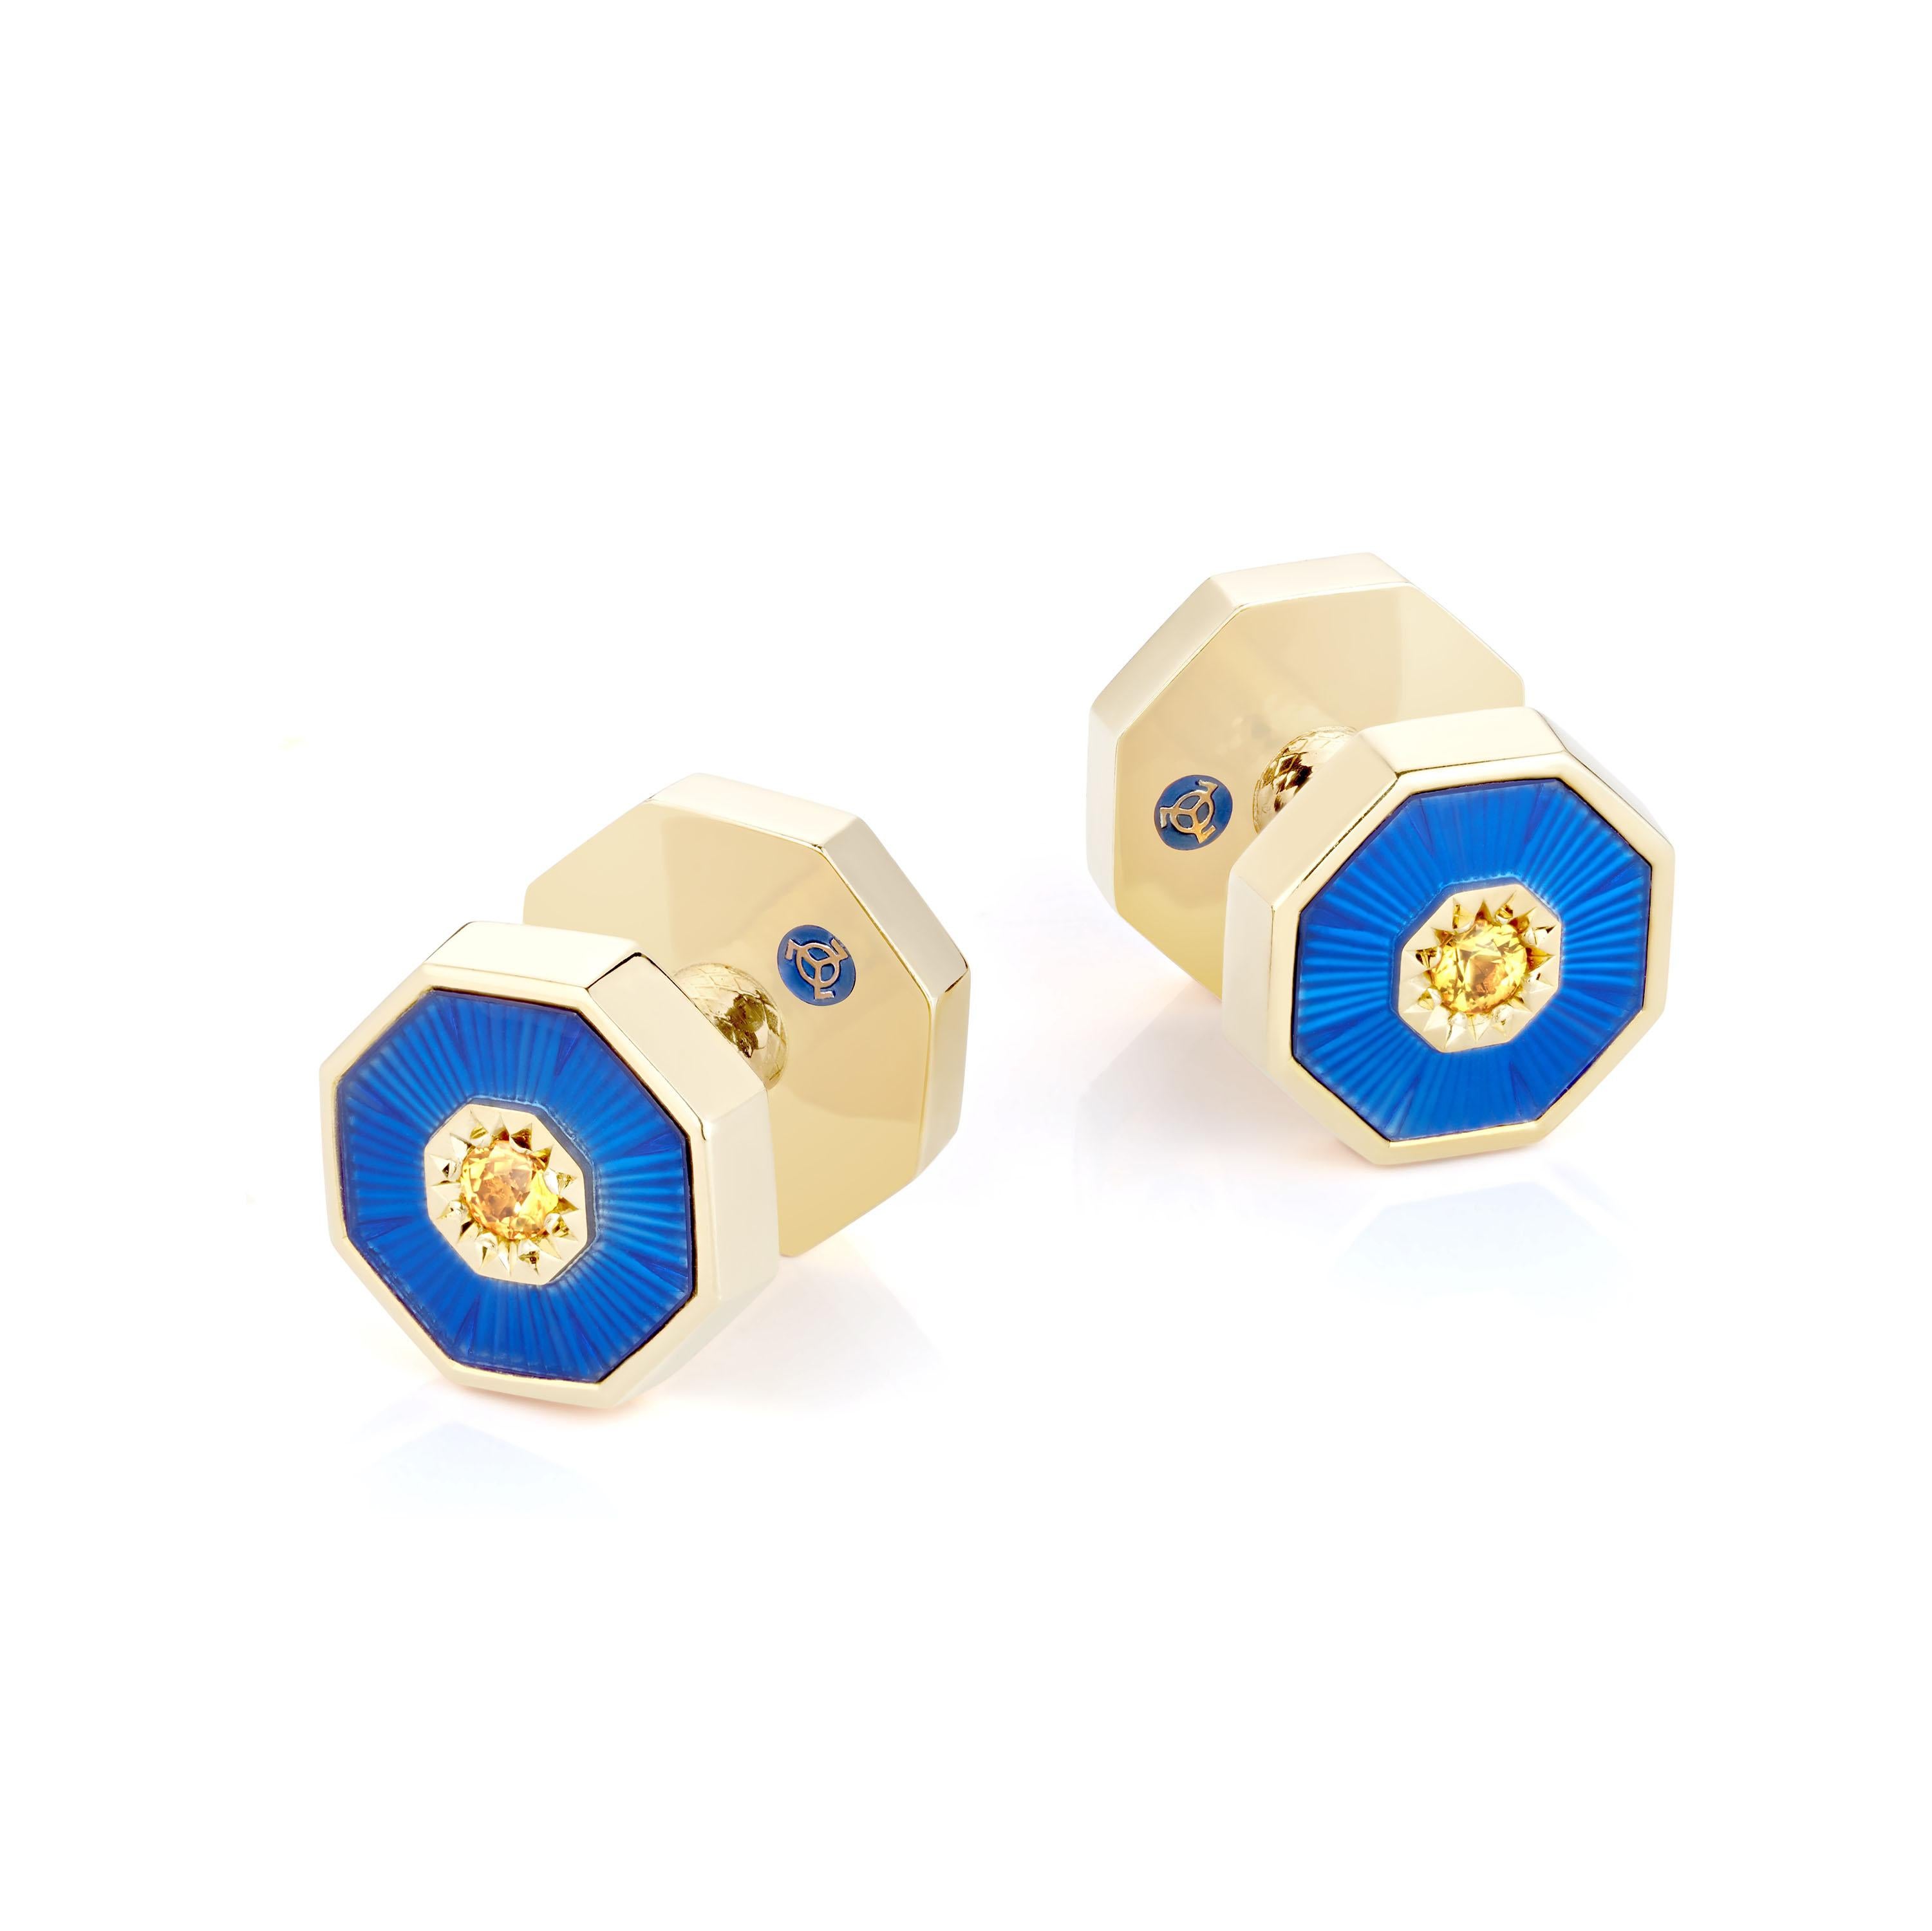 These luxurious 18K solid gold cufflinks are double-sided, set with natural yellow sapphires, and finished with royal blue guilloche enamel. Two parts connect to each other via a screw mechanism. Dome elements remind of the splendorous and geometric